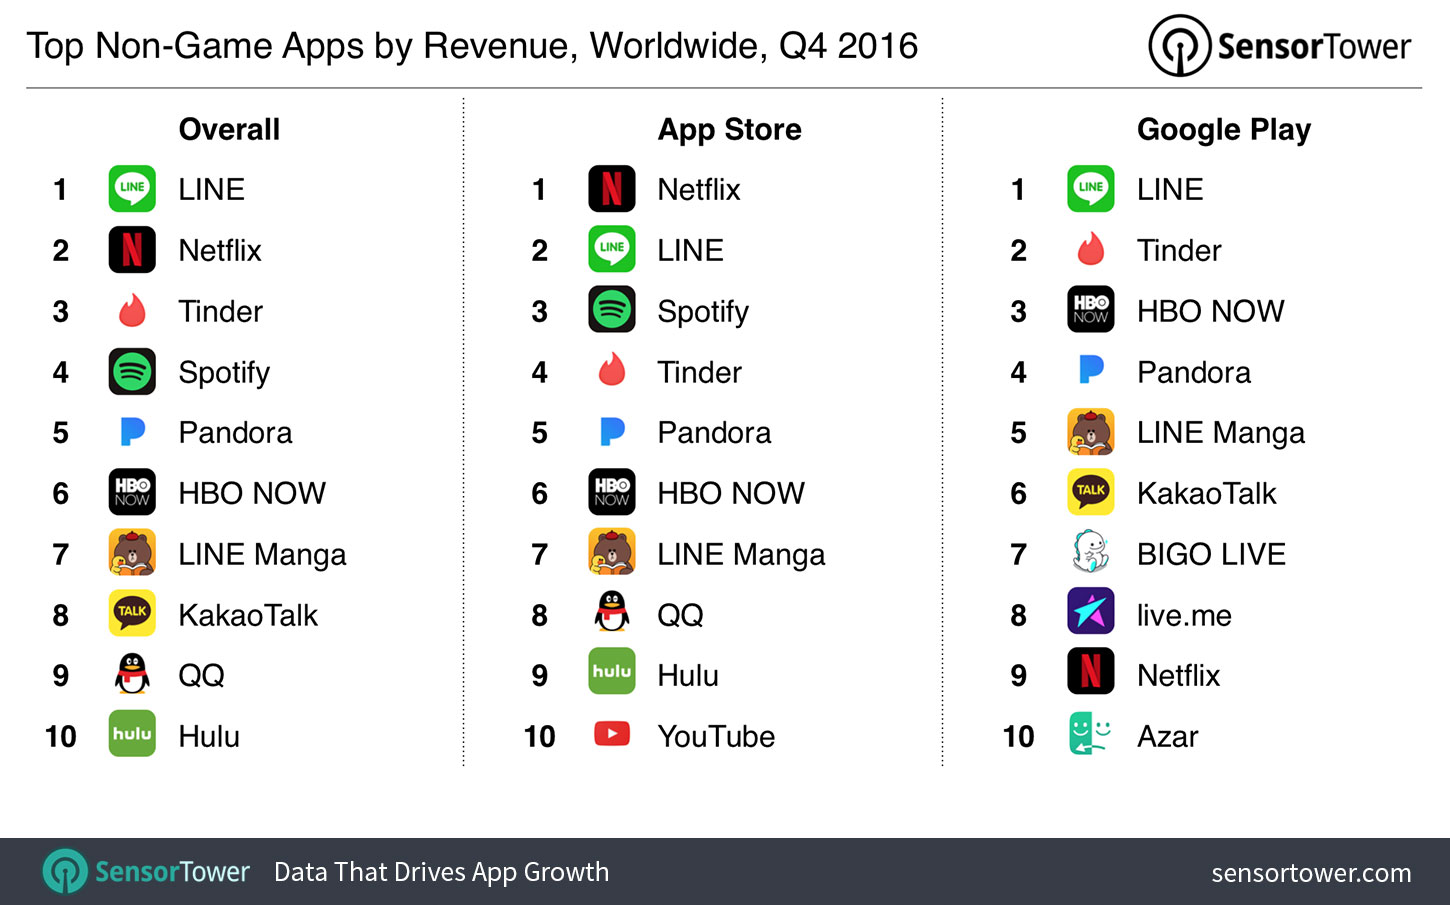 Q4 2016's Top Mobile Apps by Revenue